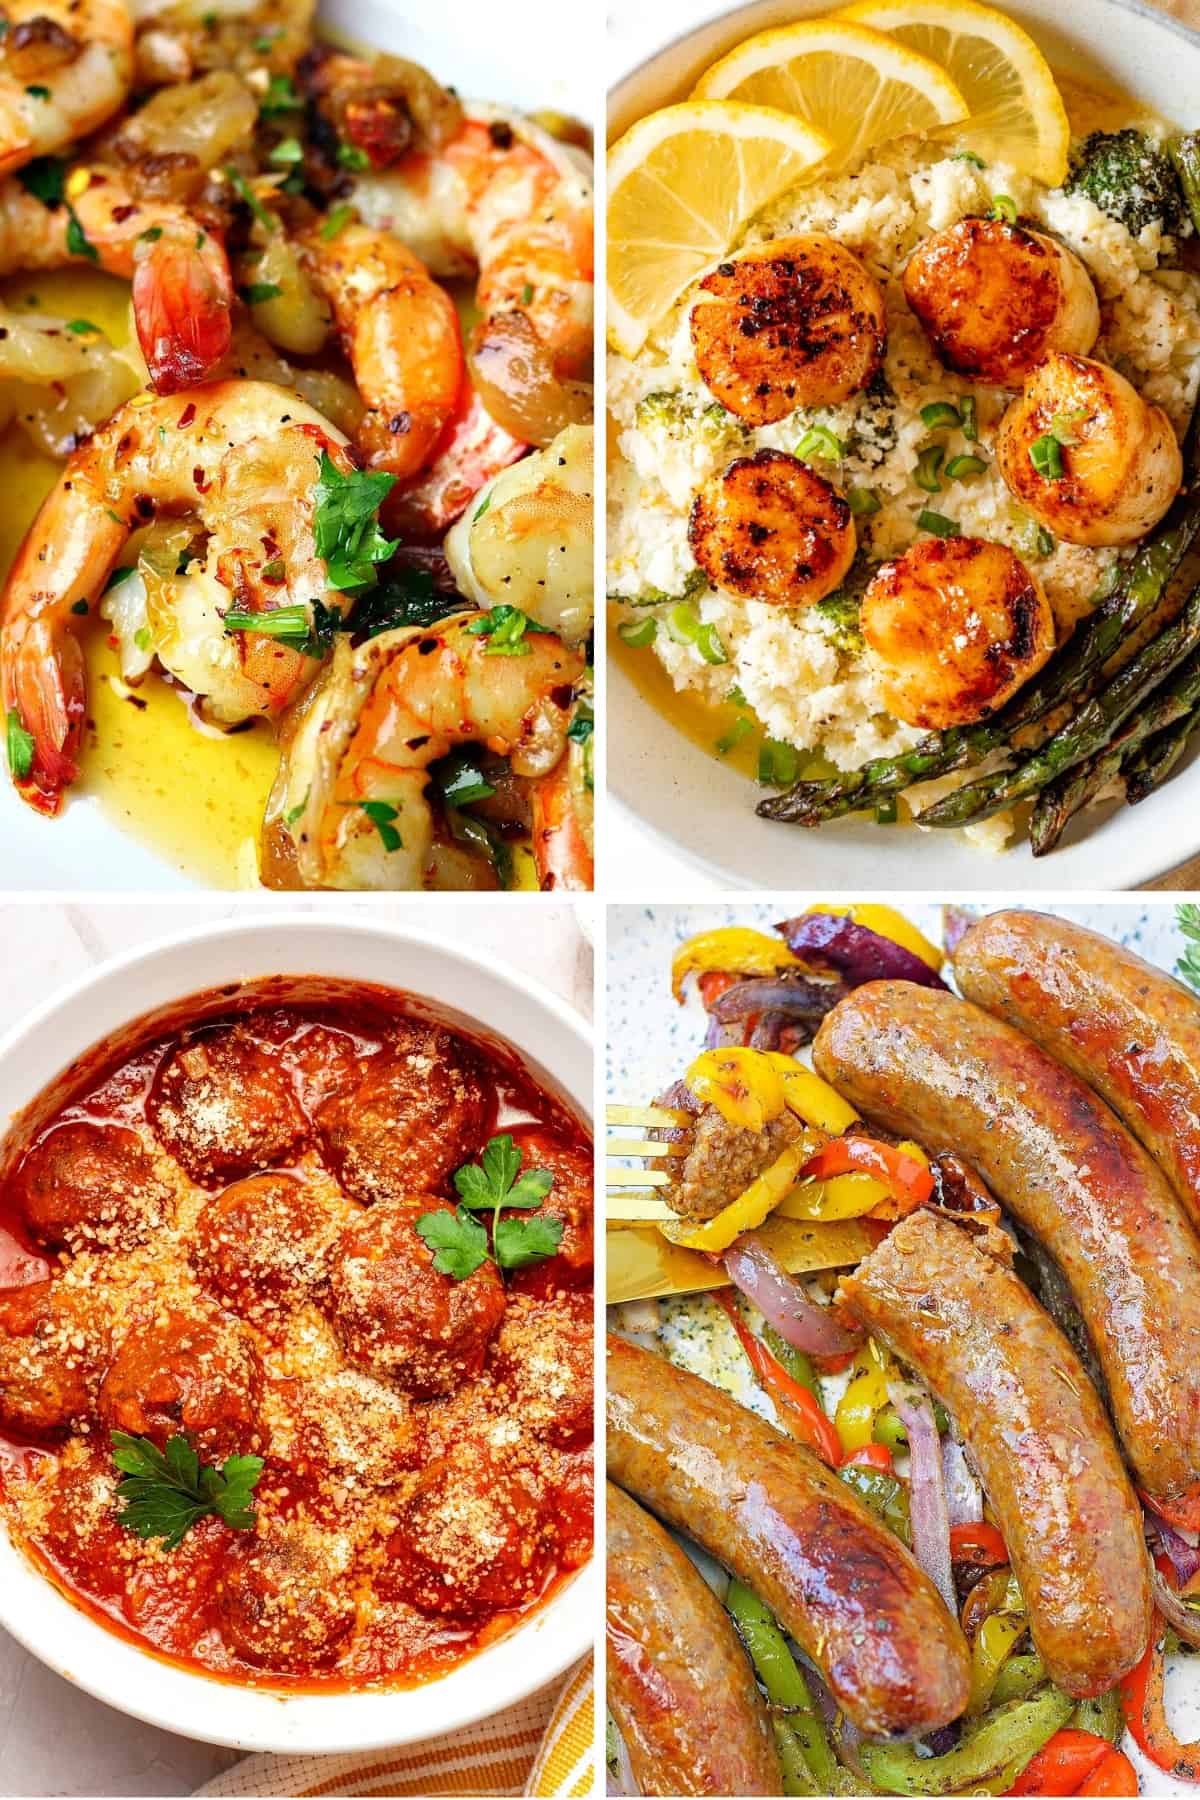 Keto Italian food recipes like shrimp scampi, seared scallops and cauliflower risotto, air fryer meatballs, and Italian sausages and peppers